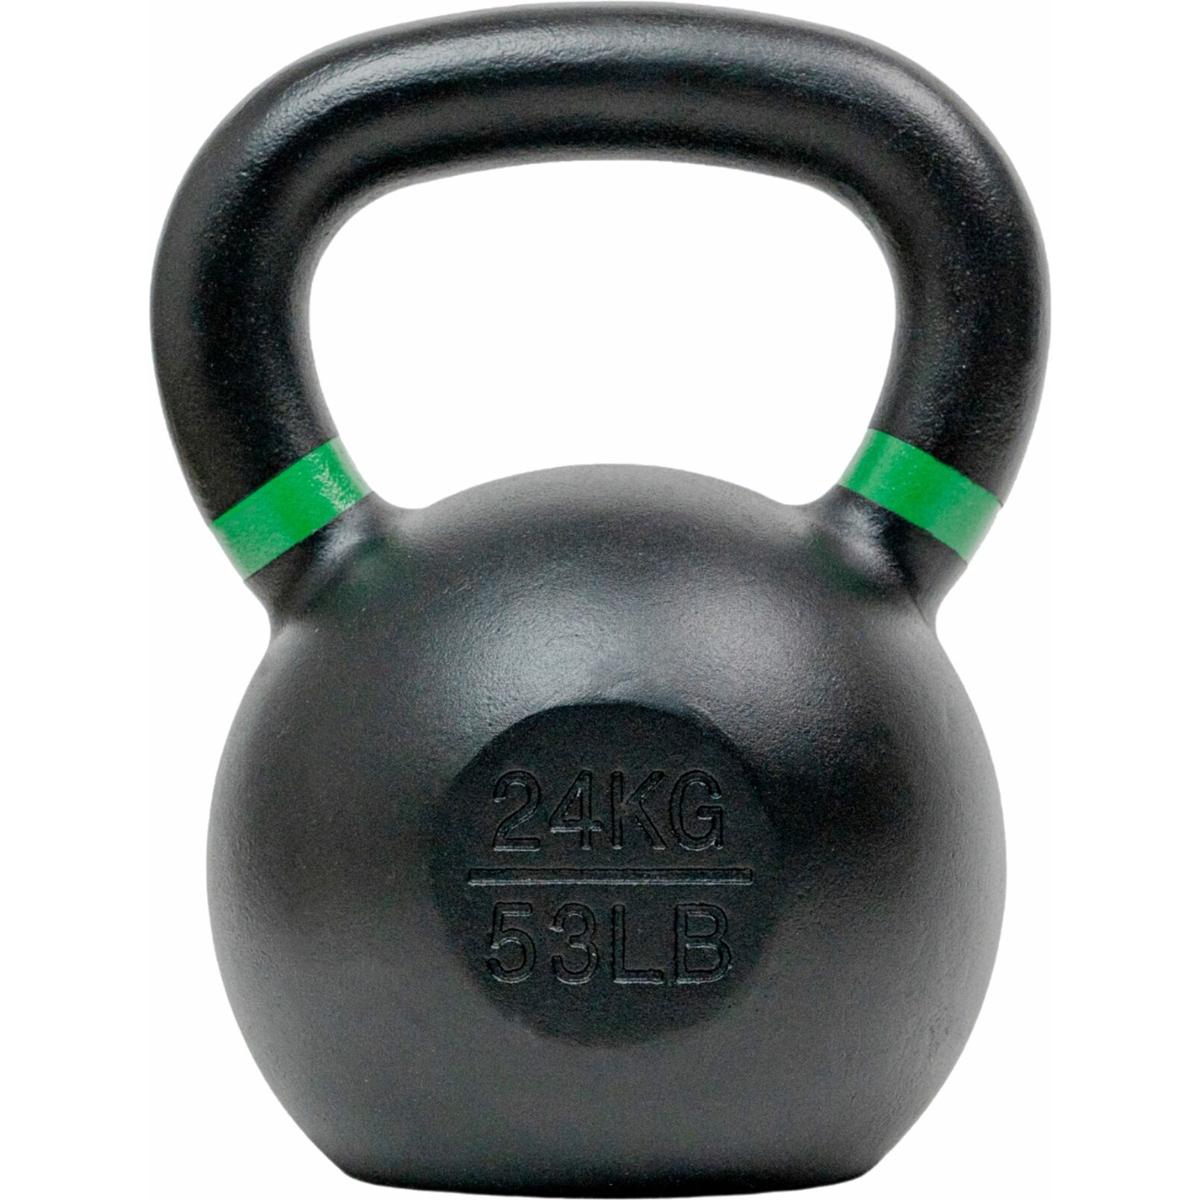 53lb Cast Iron Kettlebell for $51 Shipped